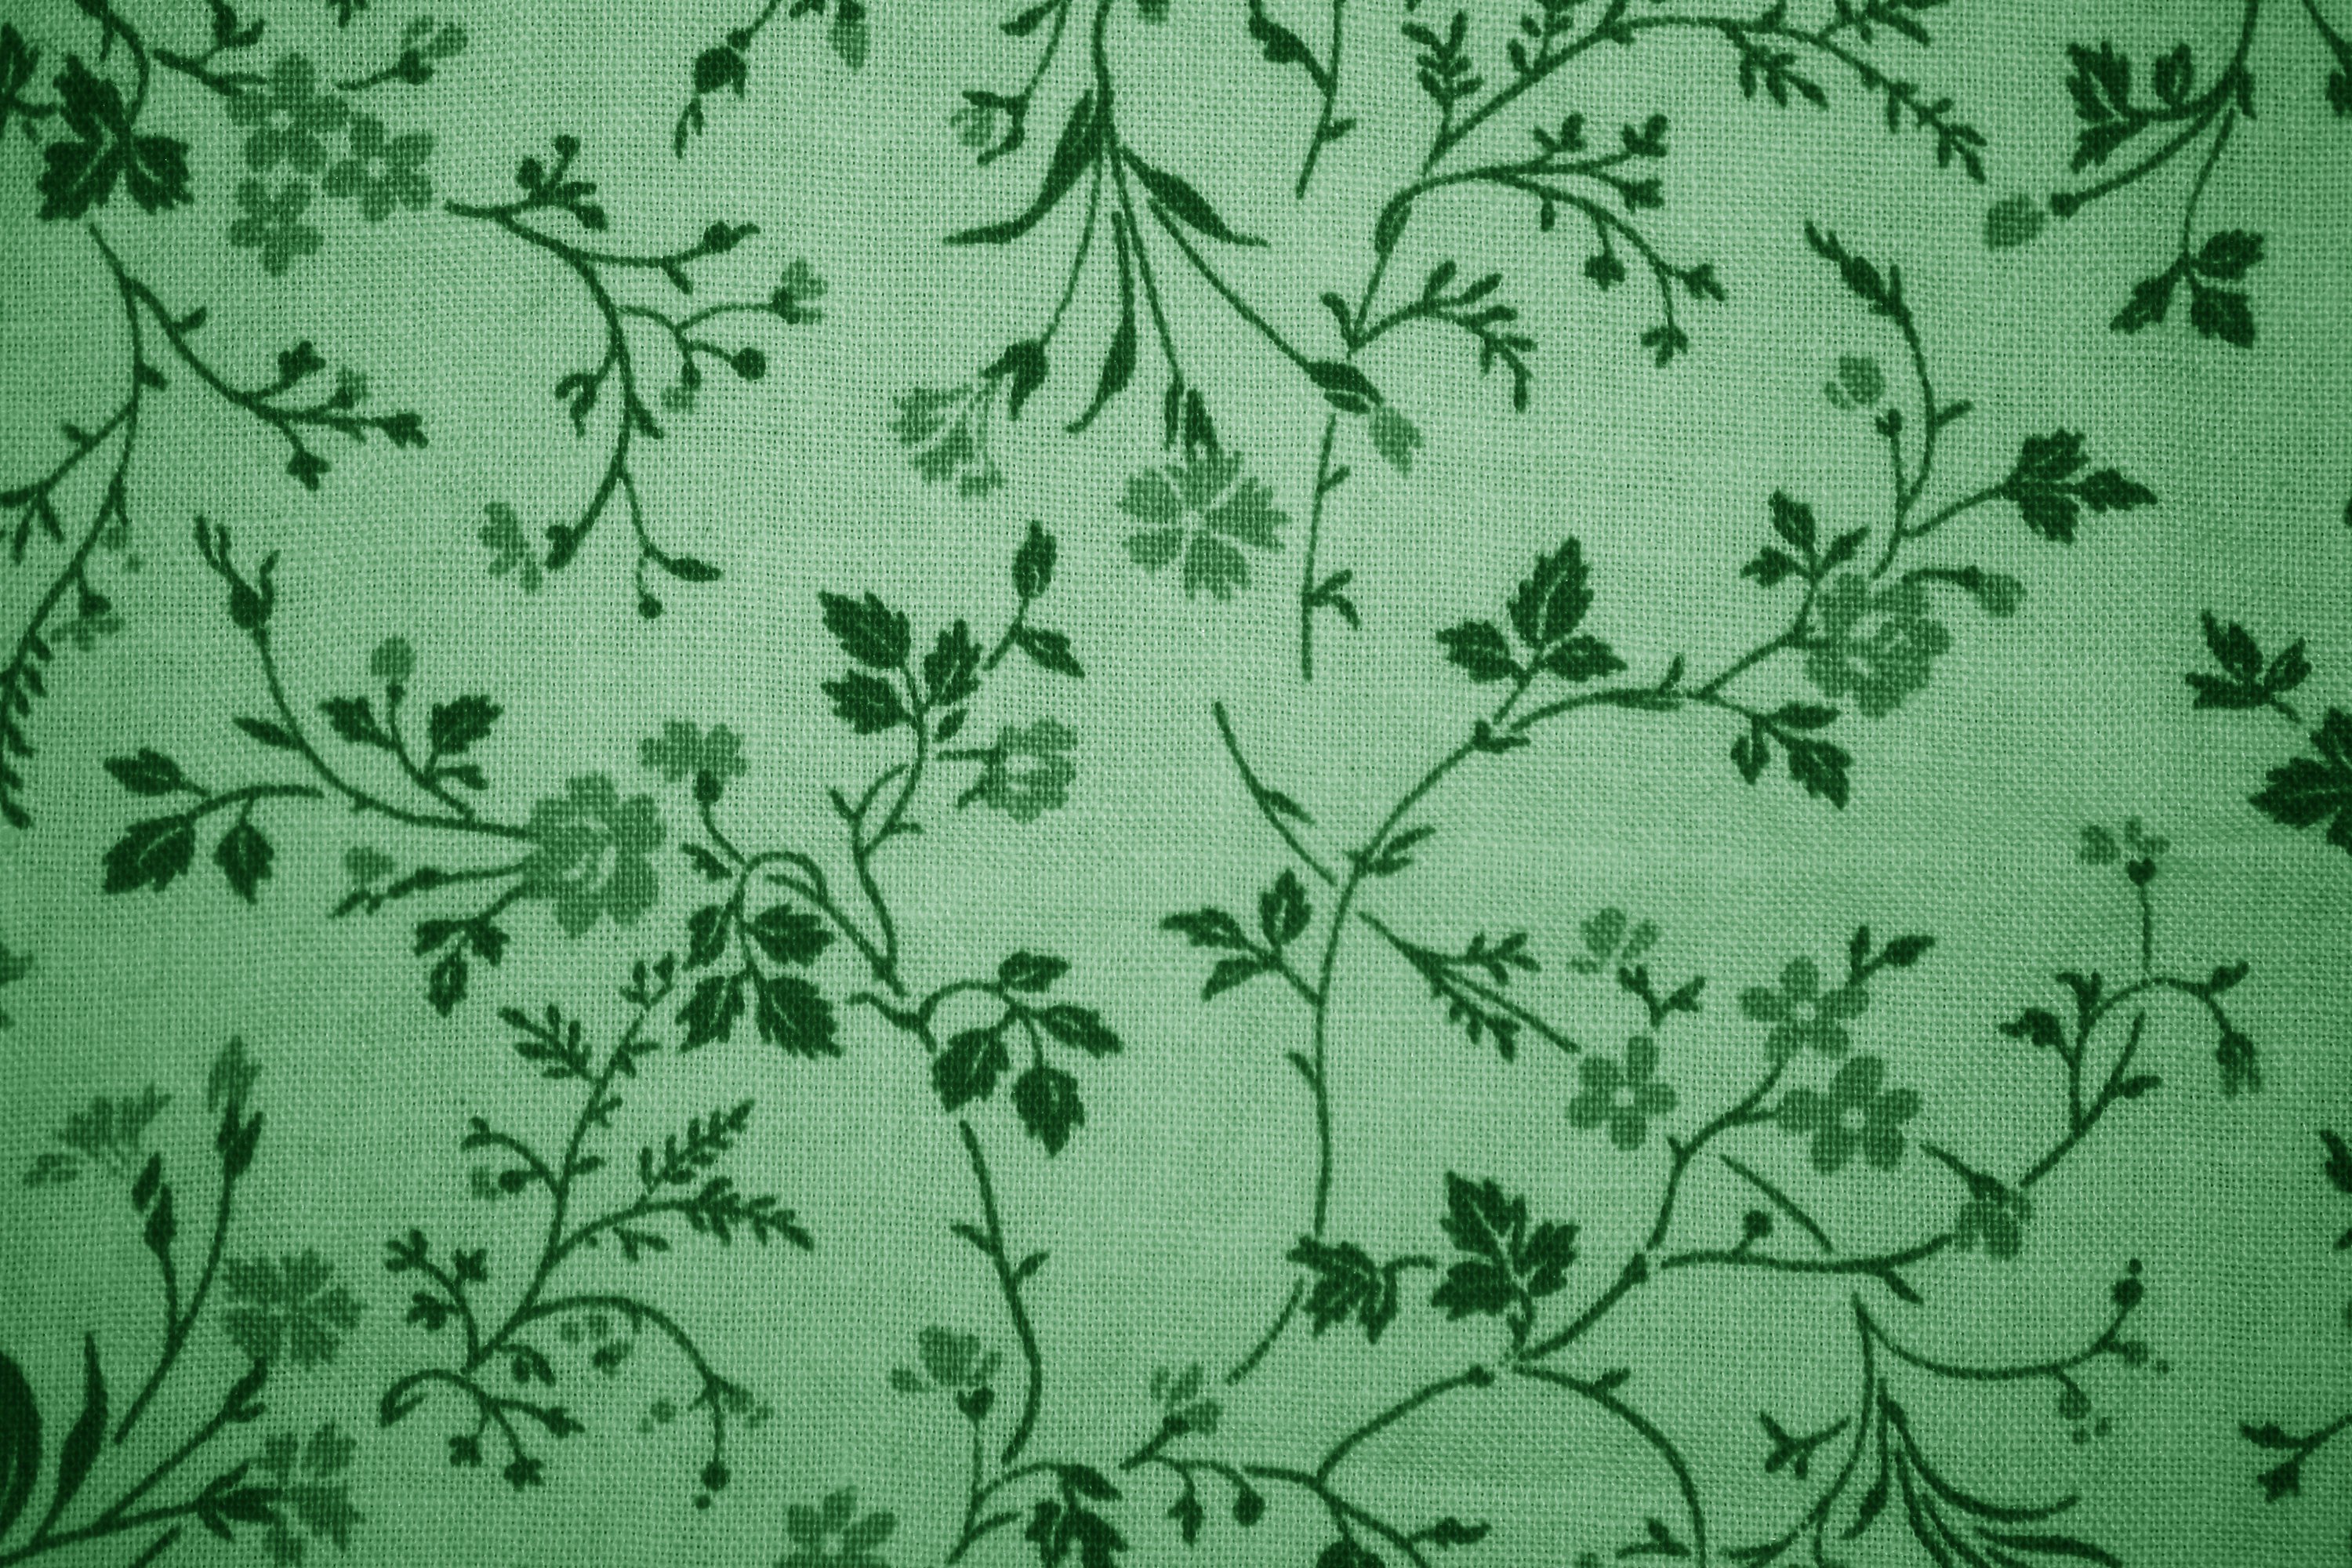 Green Floral Print Fabric Texture Picture Photograph Photos